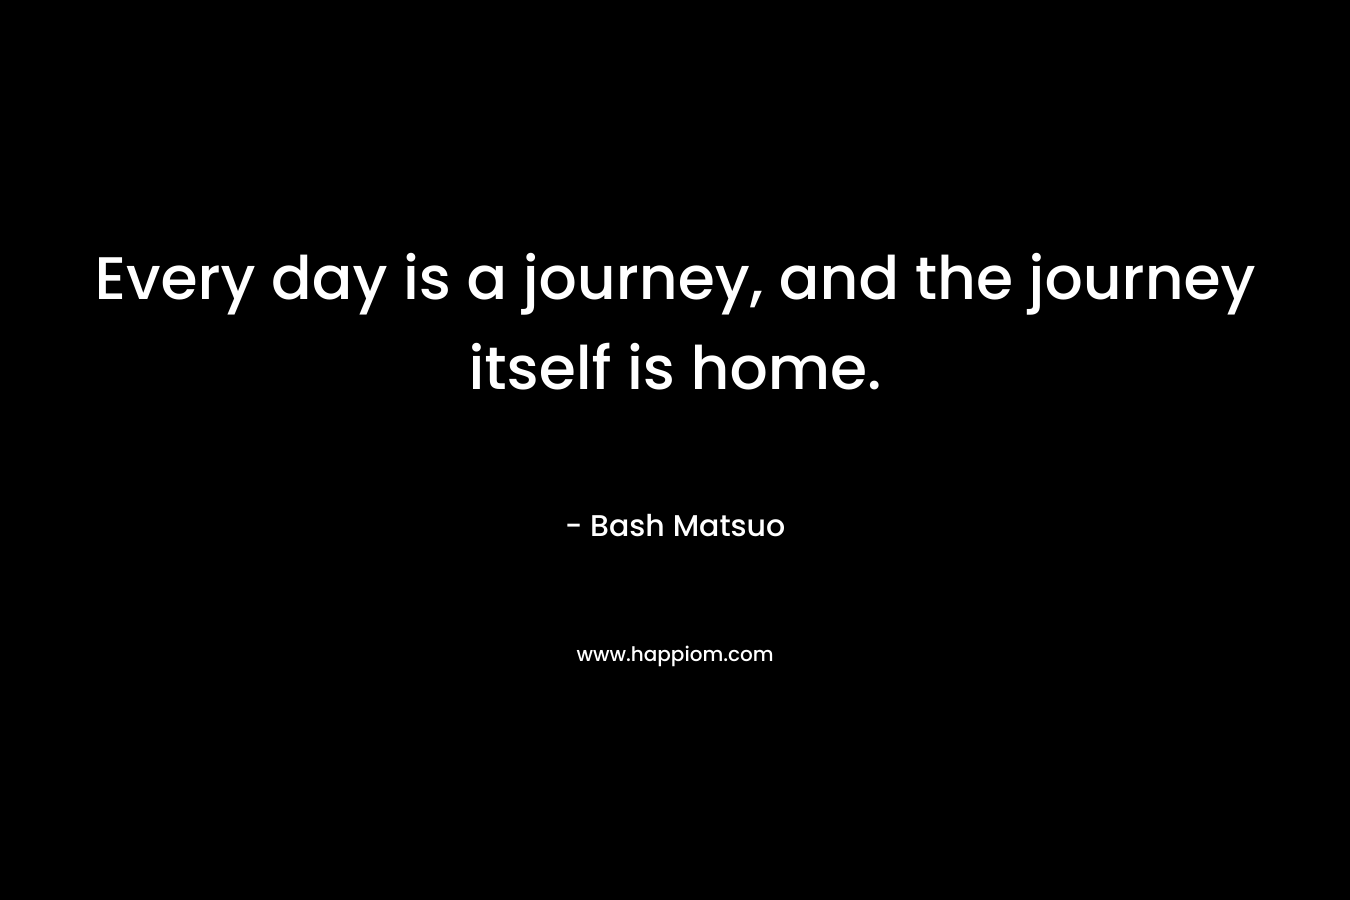 Every day is a journey, and the journey itself is home. – Bash Matsuo